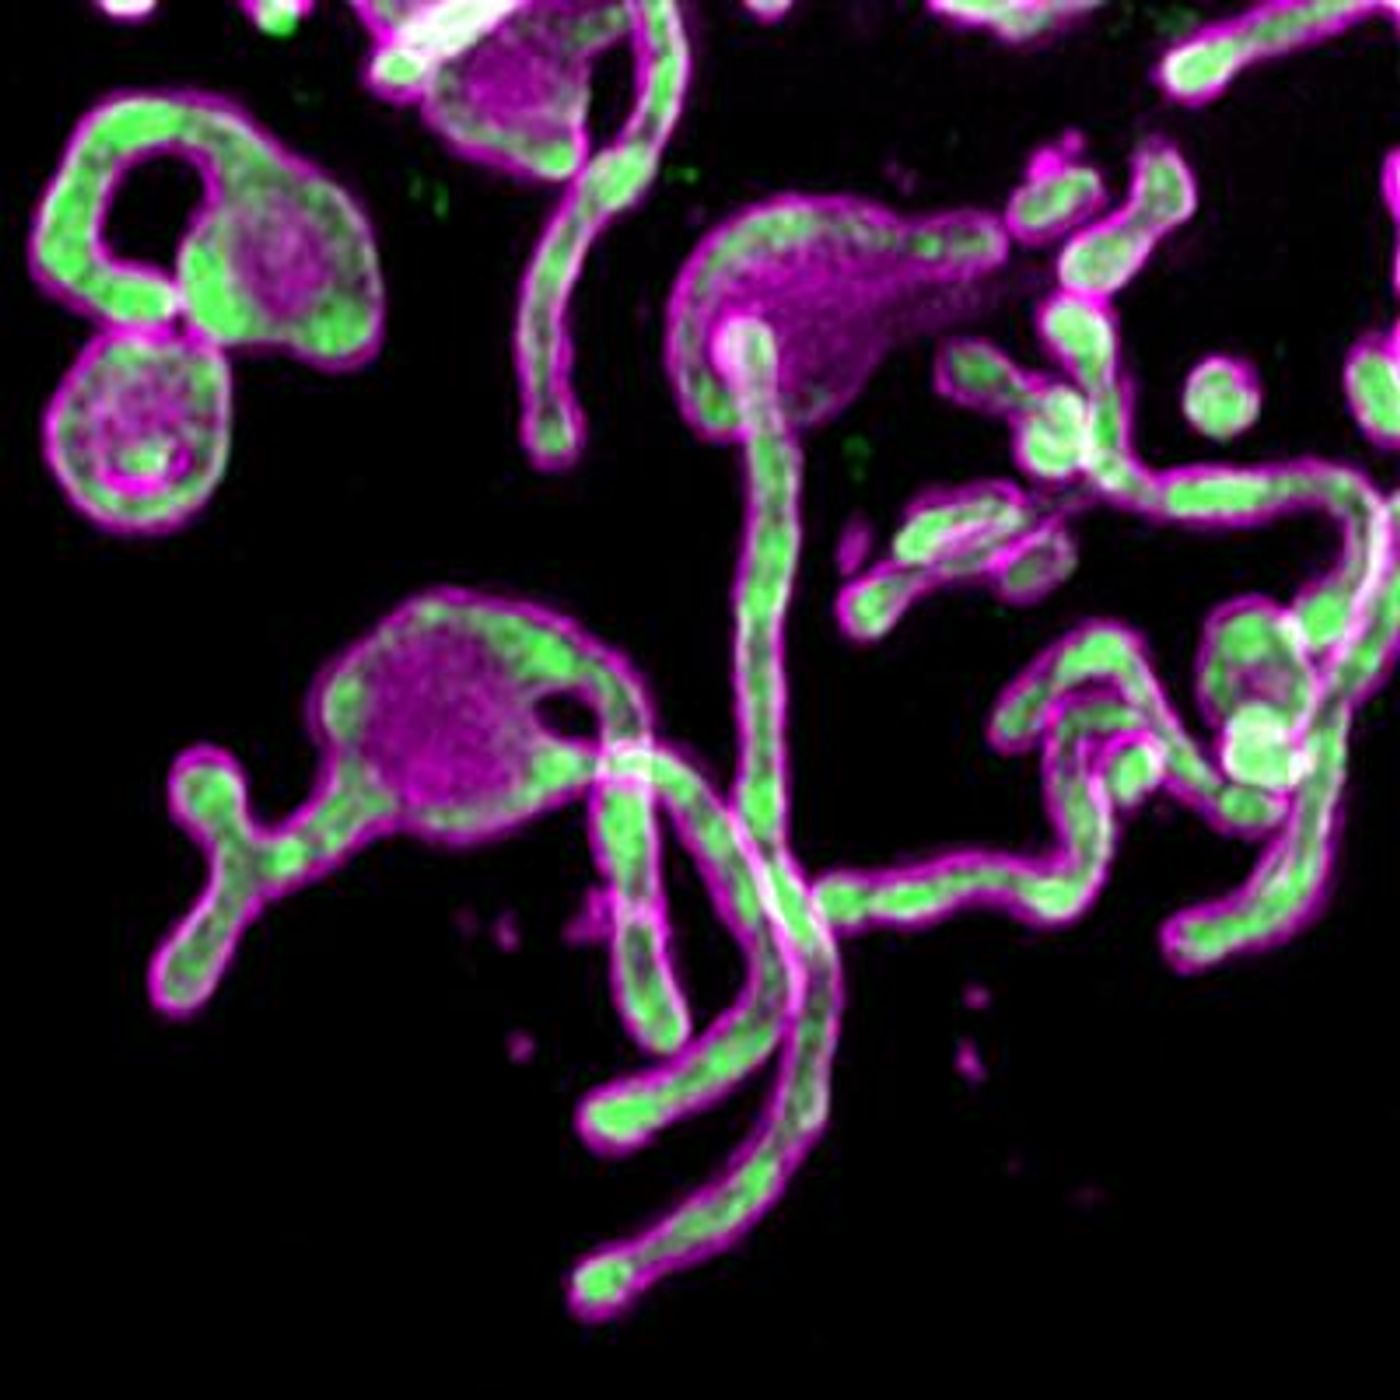 The microprotein PIGBOS (magenta) shown sitting on the outer membranes of mitochondria (green), where it is poised to make contact with other organelles in the cell. / Credit: Salk Institute/Waitt Advanced Biophotonics Core Facility